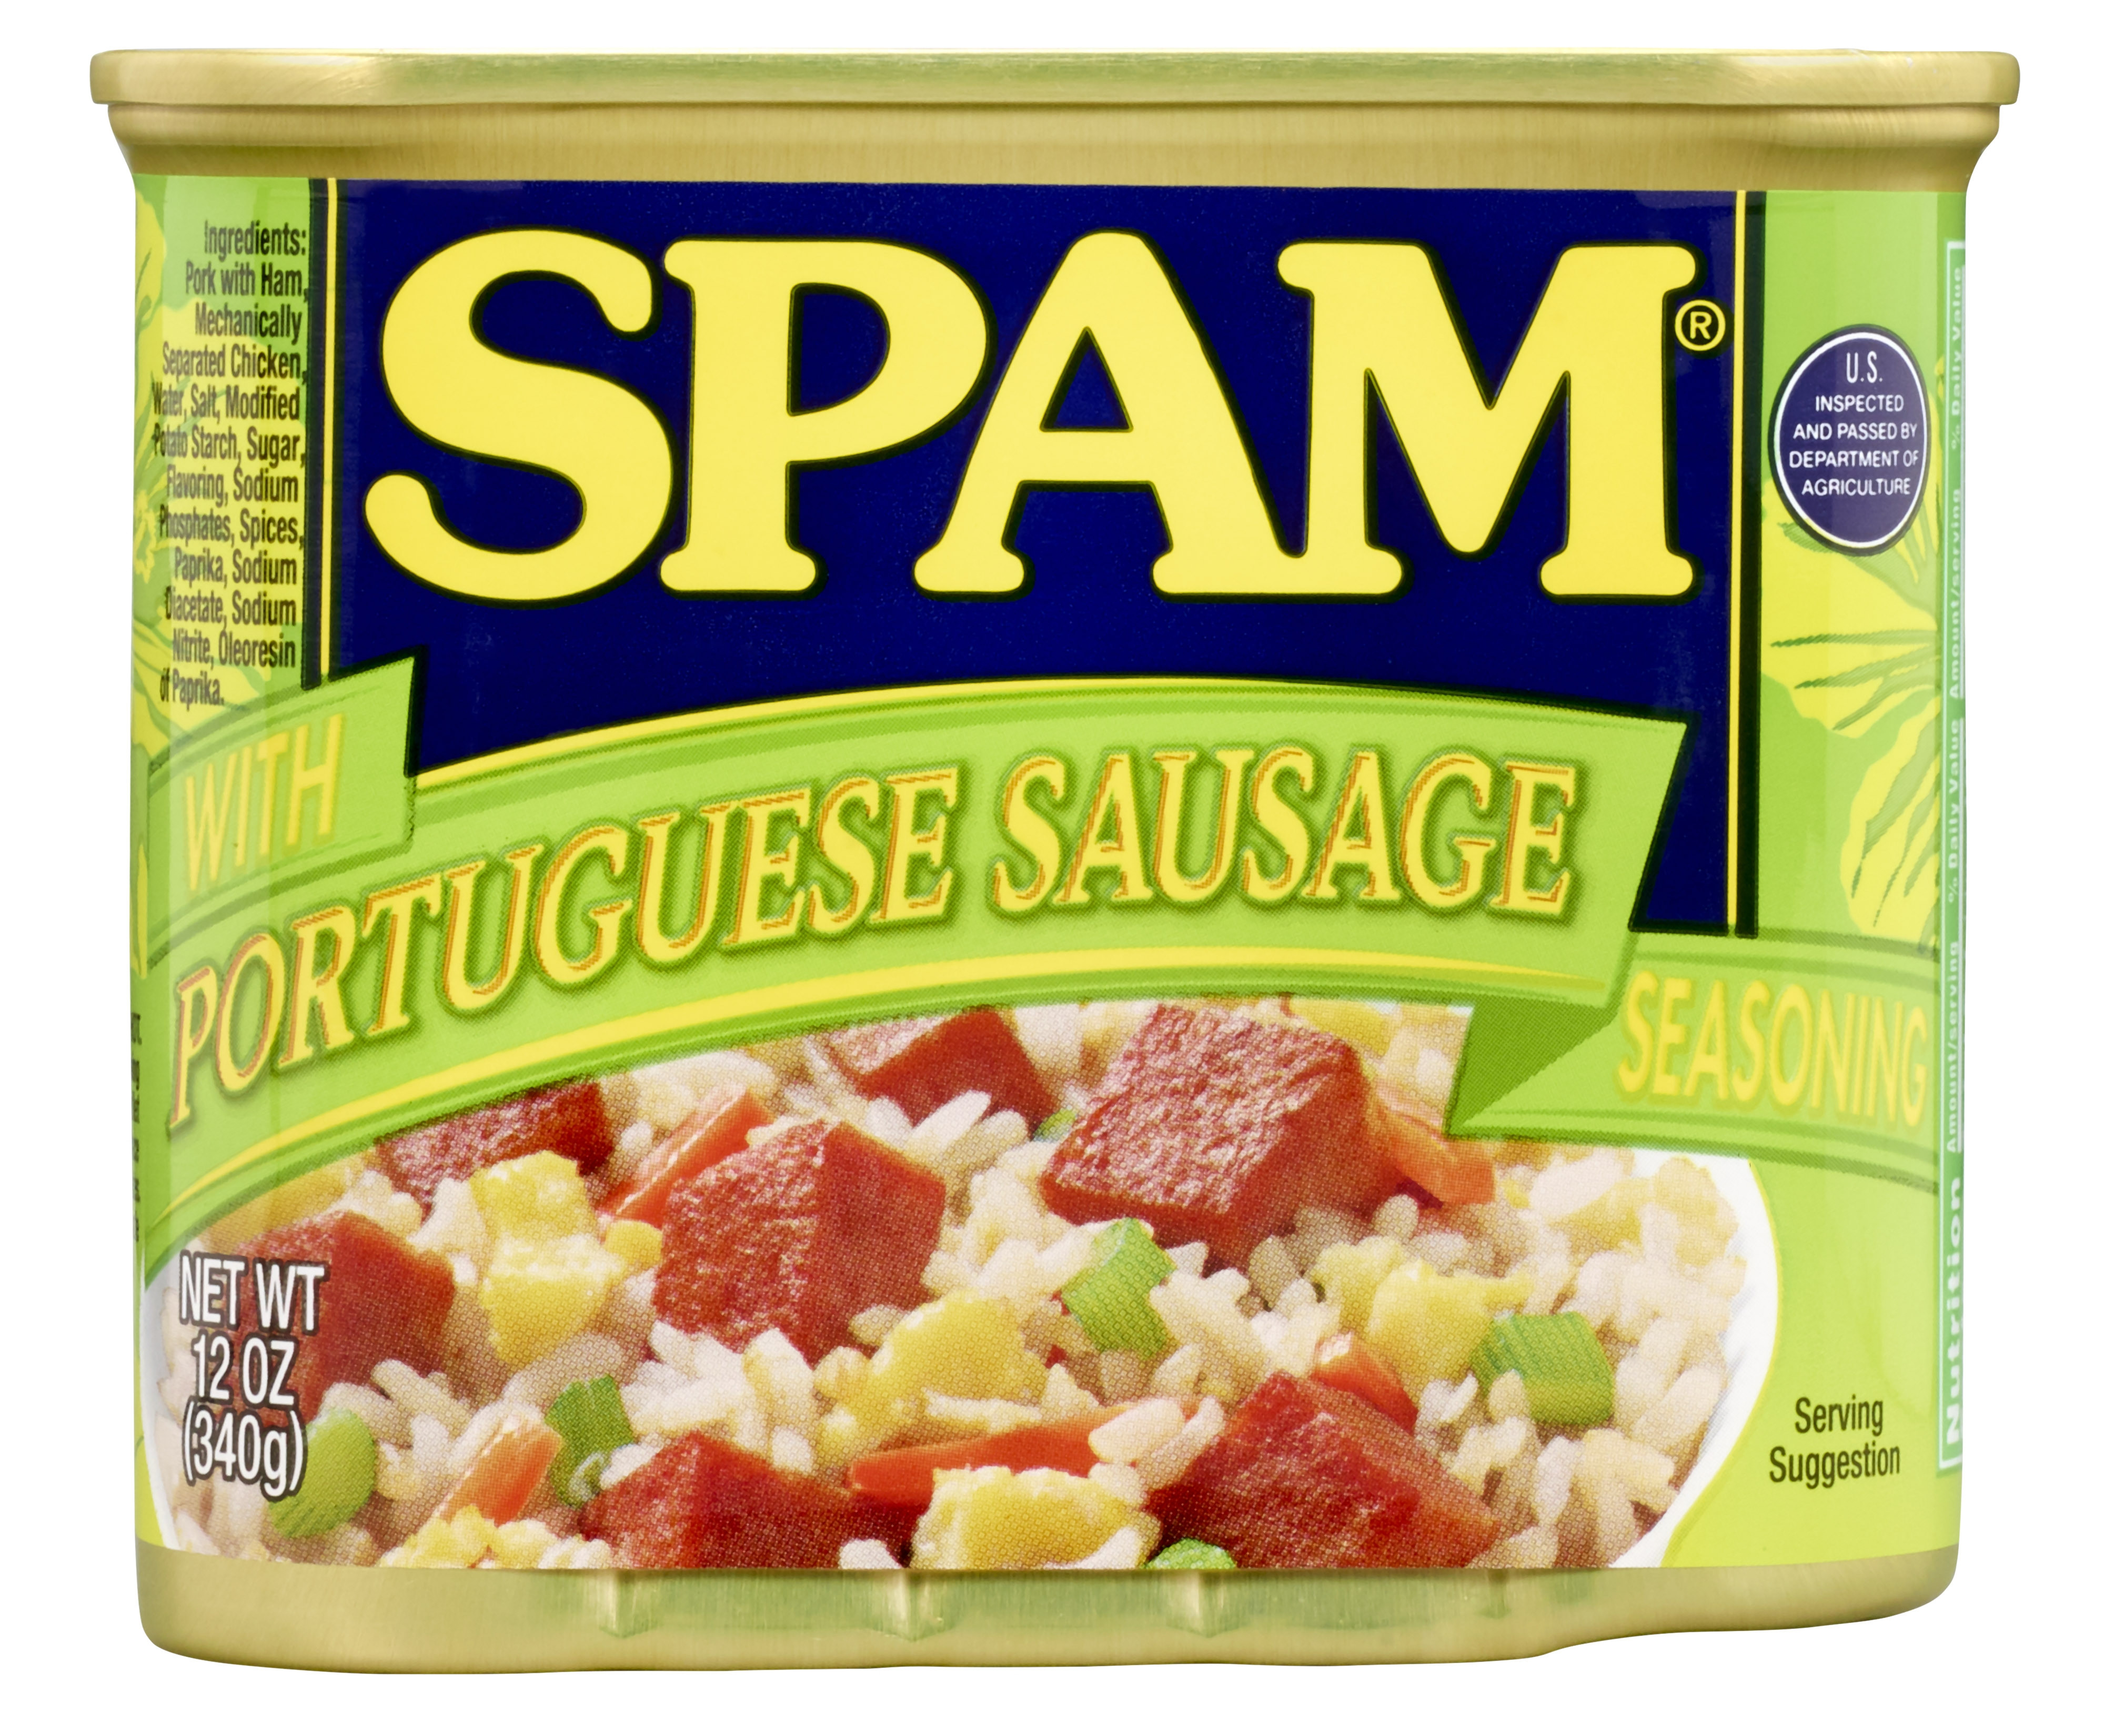 SPAM® with Portuguese Sausage Seasoning